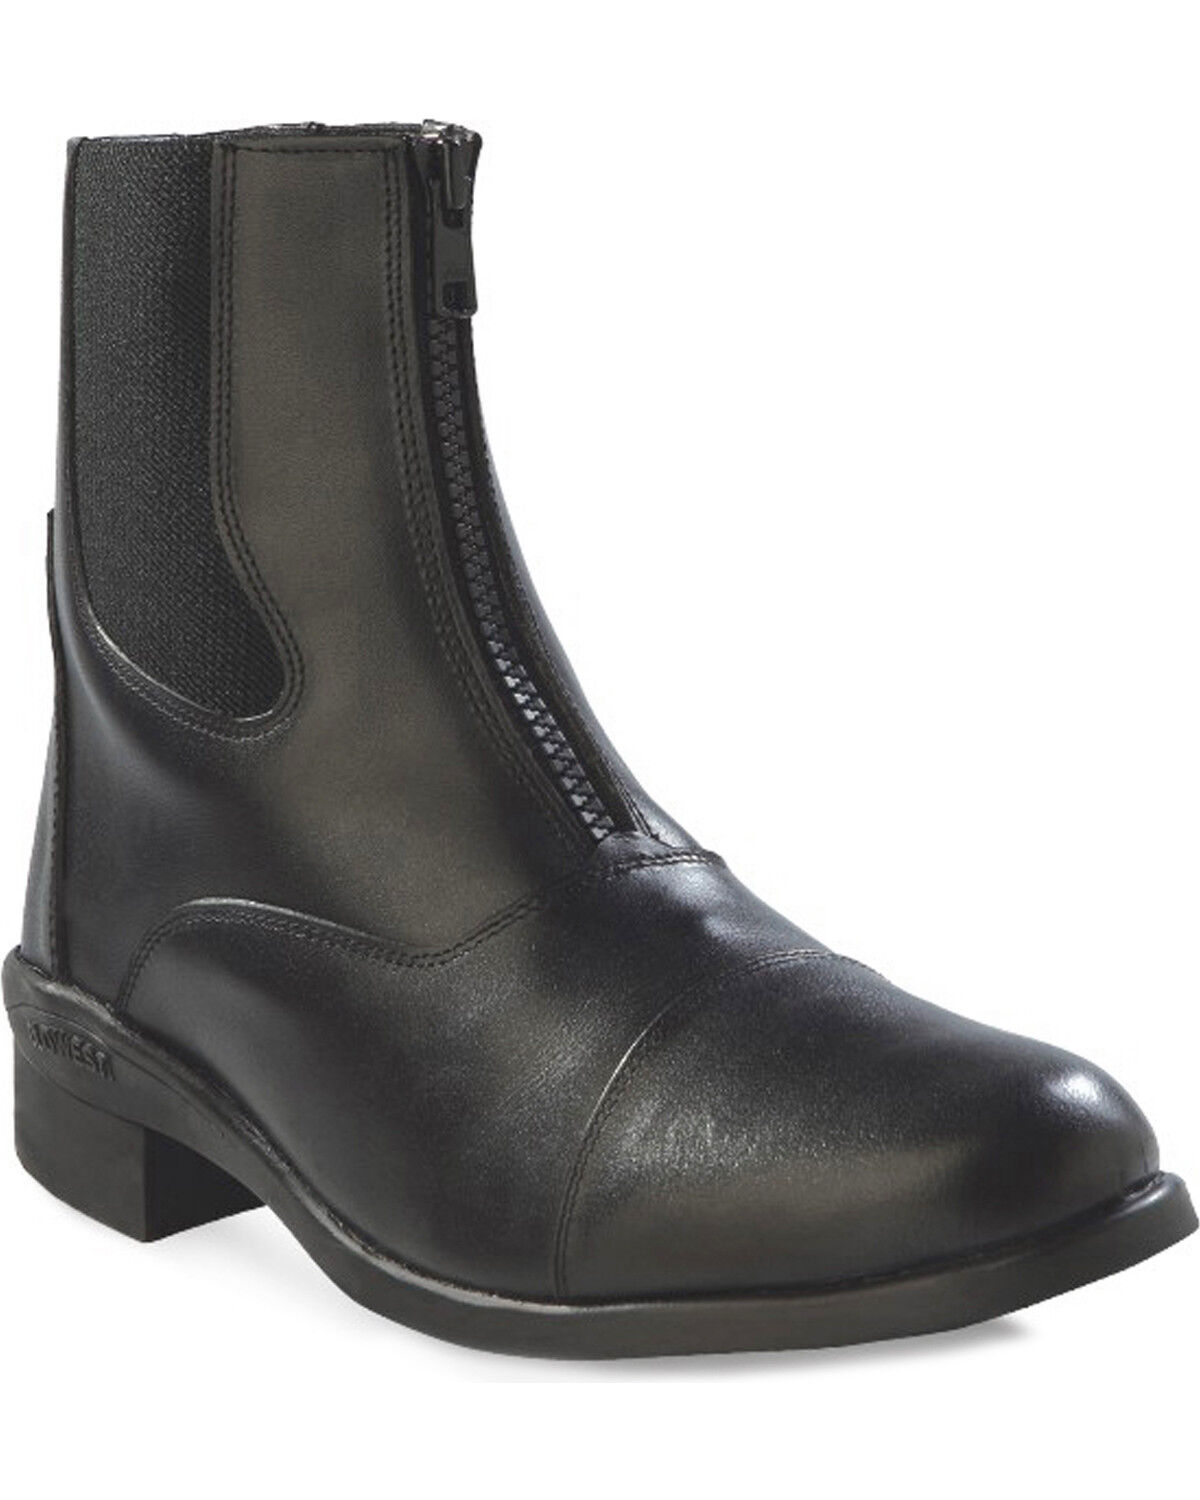 short riding boots with zip